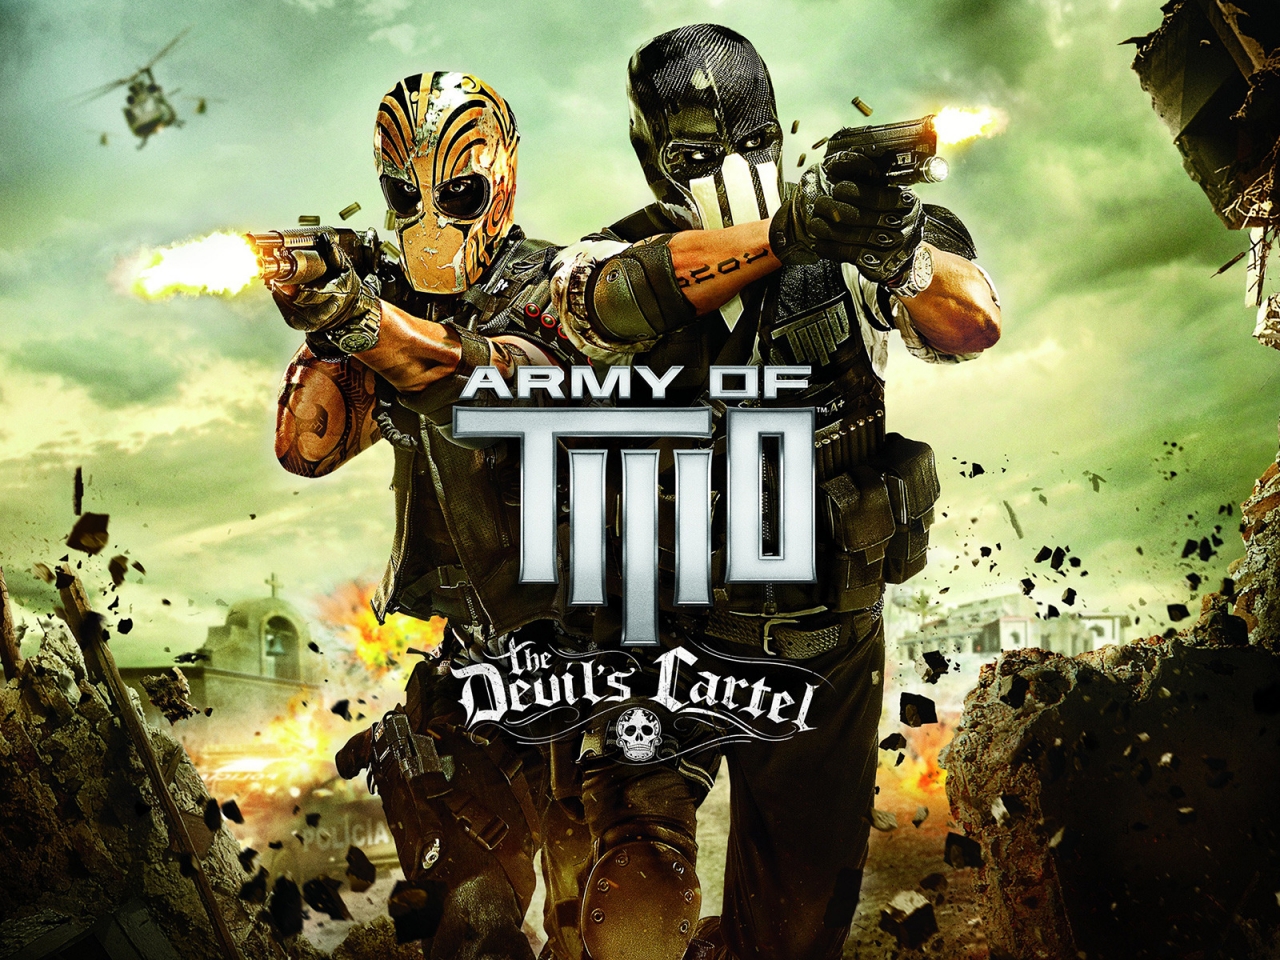 Army of Two The Devils Cartel for 1280 x 960 resolution